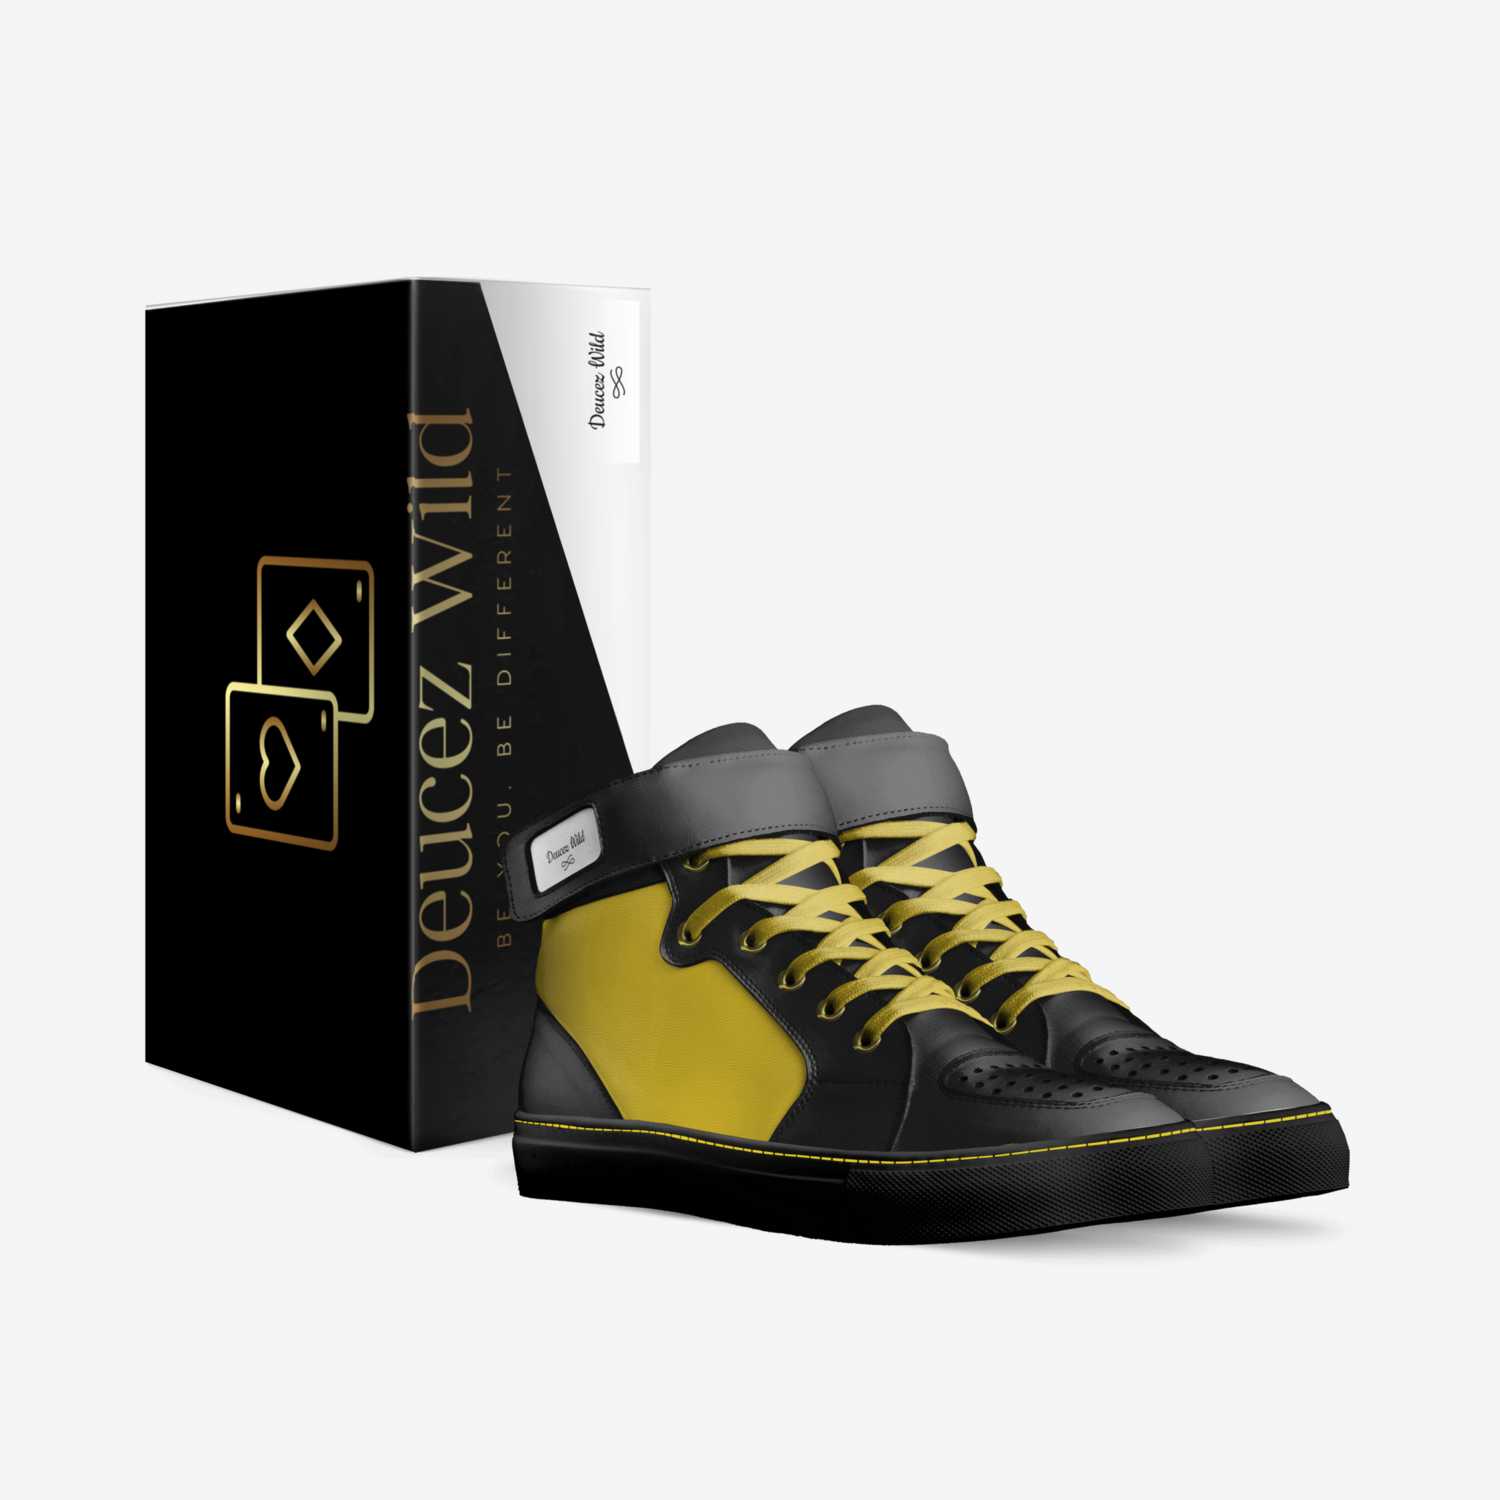 Deucez Wild custom made in Italy shoes by Kenneth Turner Jr | Box view